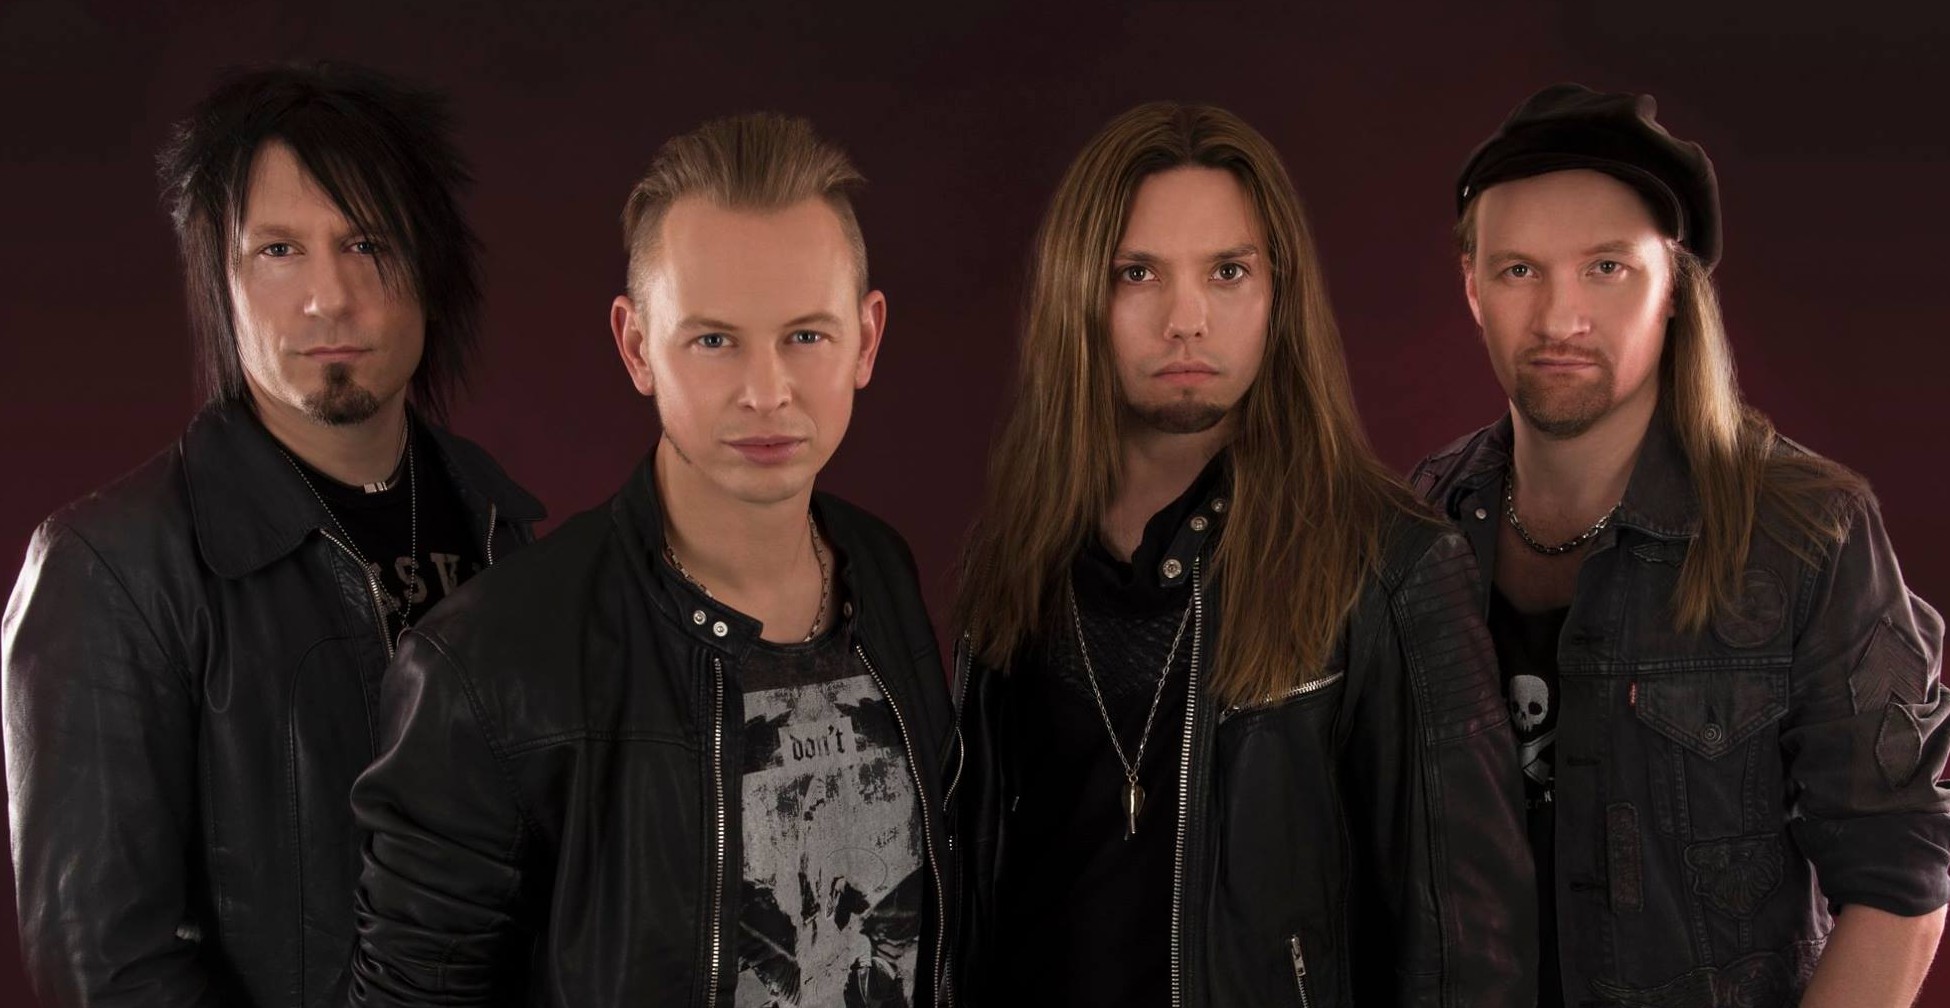 Magnus Henriksson (Eclipse): “Runaways it’s a catchy uptempo song that sounds very much like Eclipse” (Swedish semifinalists – Exclusive Interview)